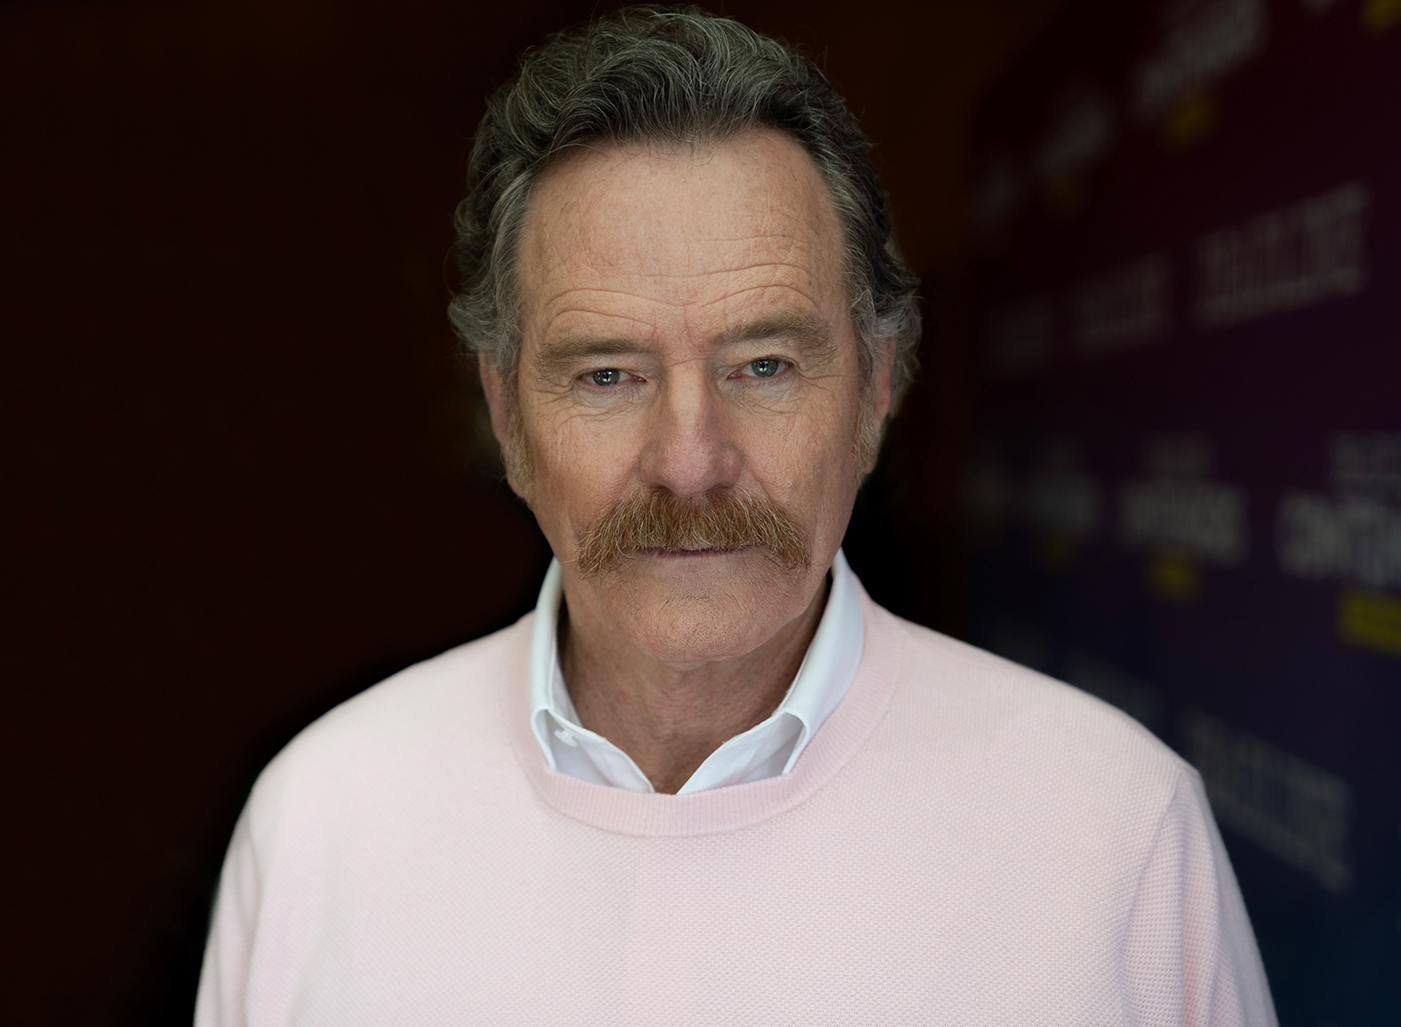 Bryan Cranston with a mustache in a headshot